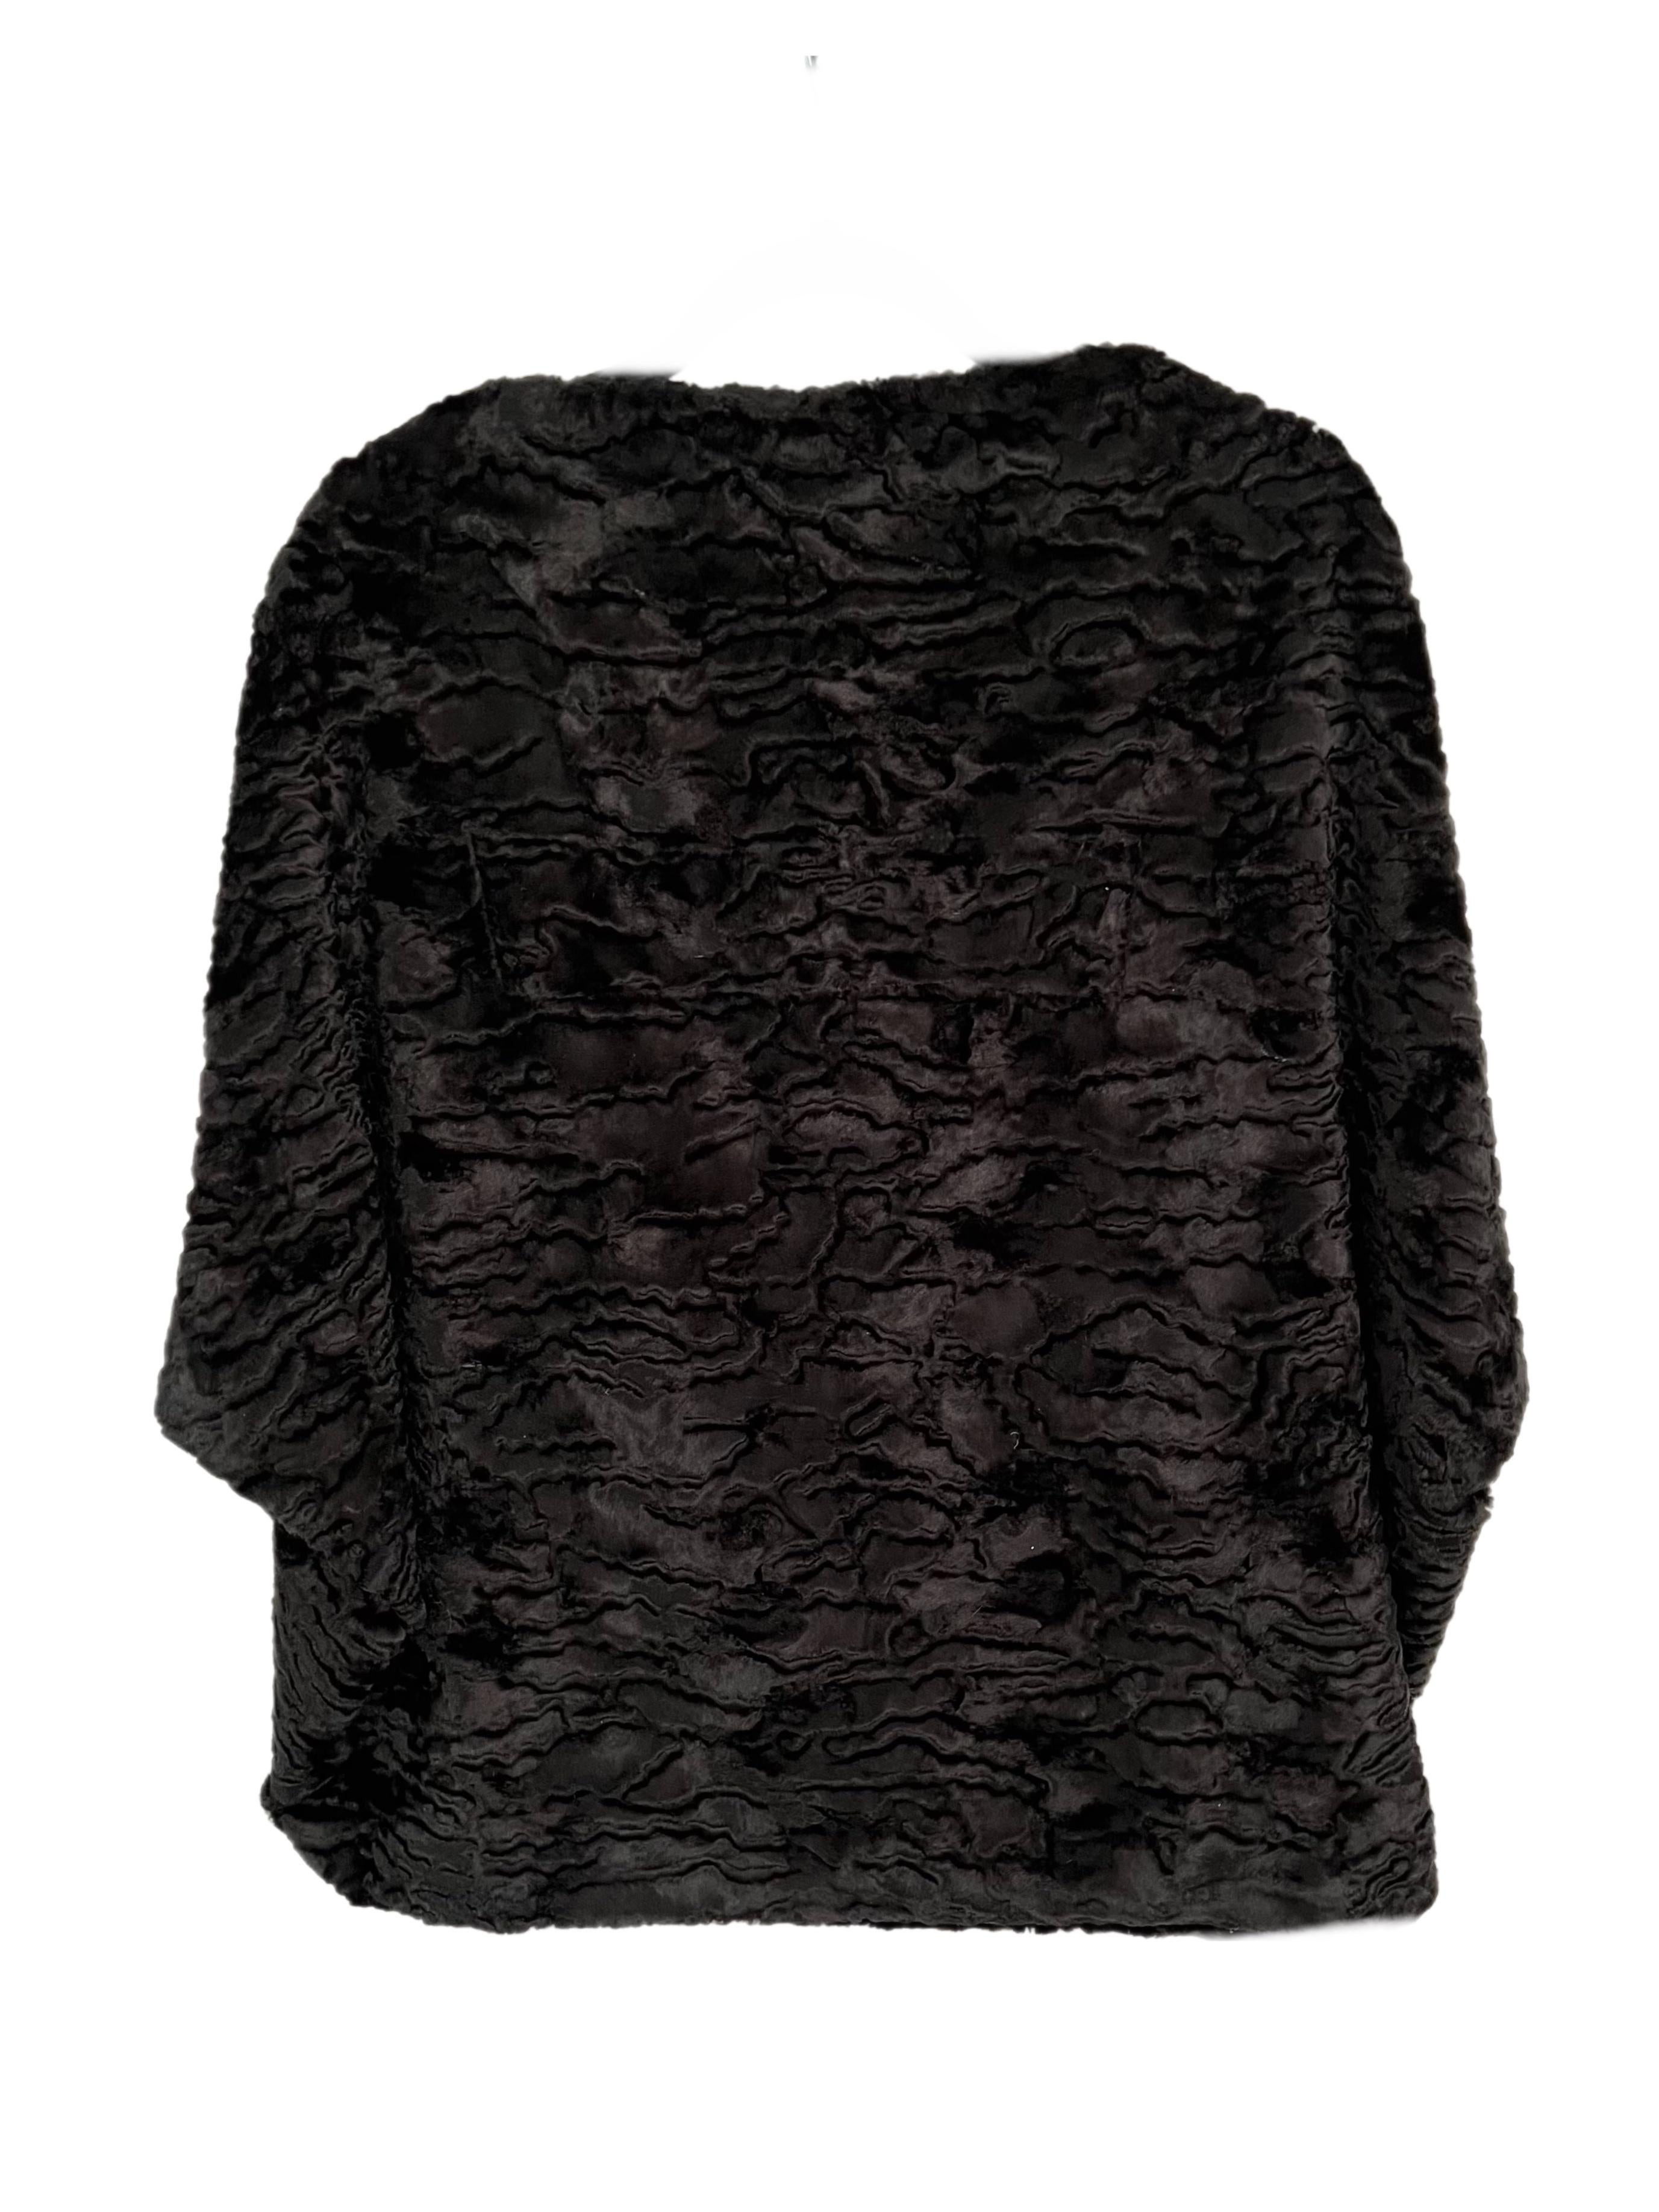 Pelush Black Faux Fur Astrakhan Broadtail Top With Embroidery Patches - One size For Sale 2